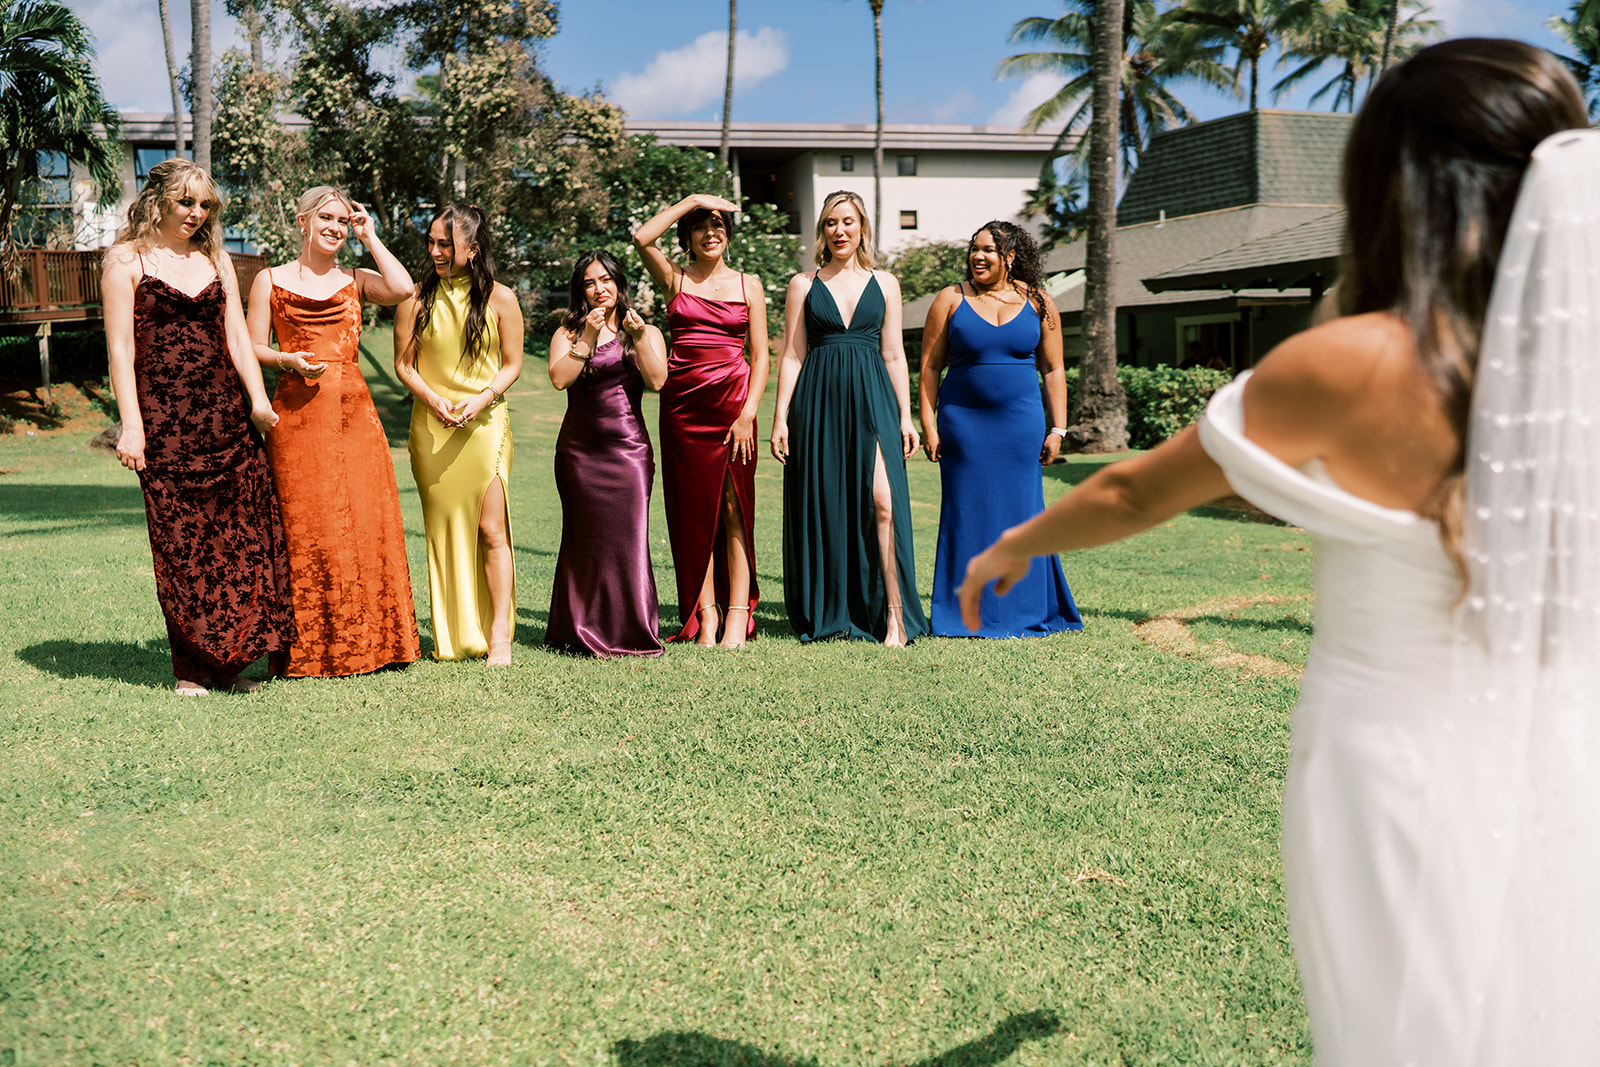 A bride in white gestures towards a group of smiling bridesmaids in colorful dresses standing on a lawn in Kauai